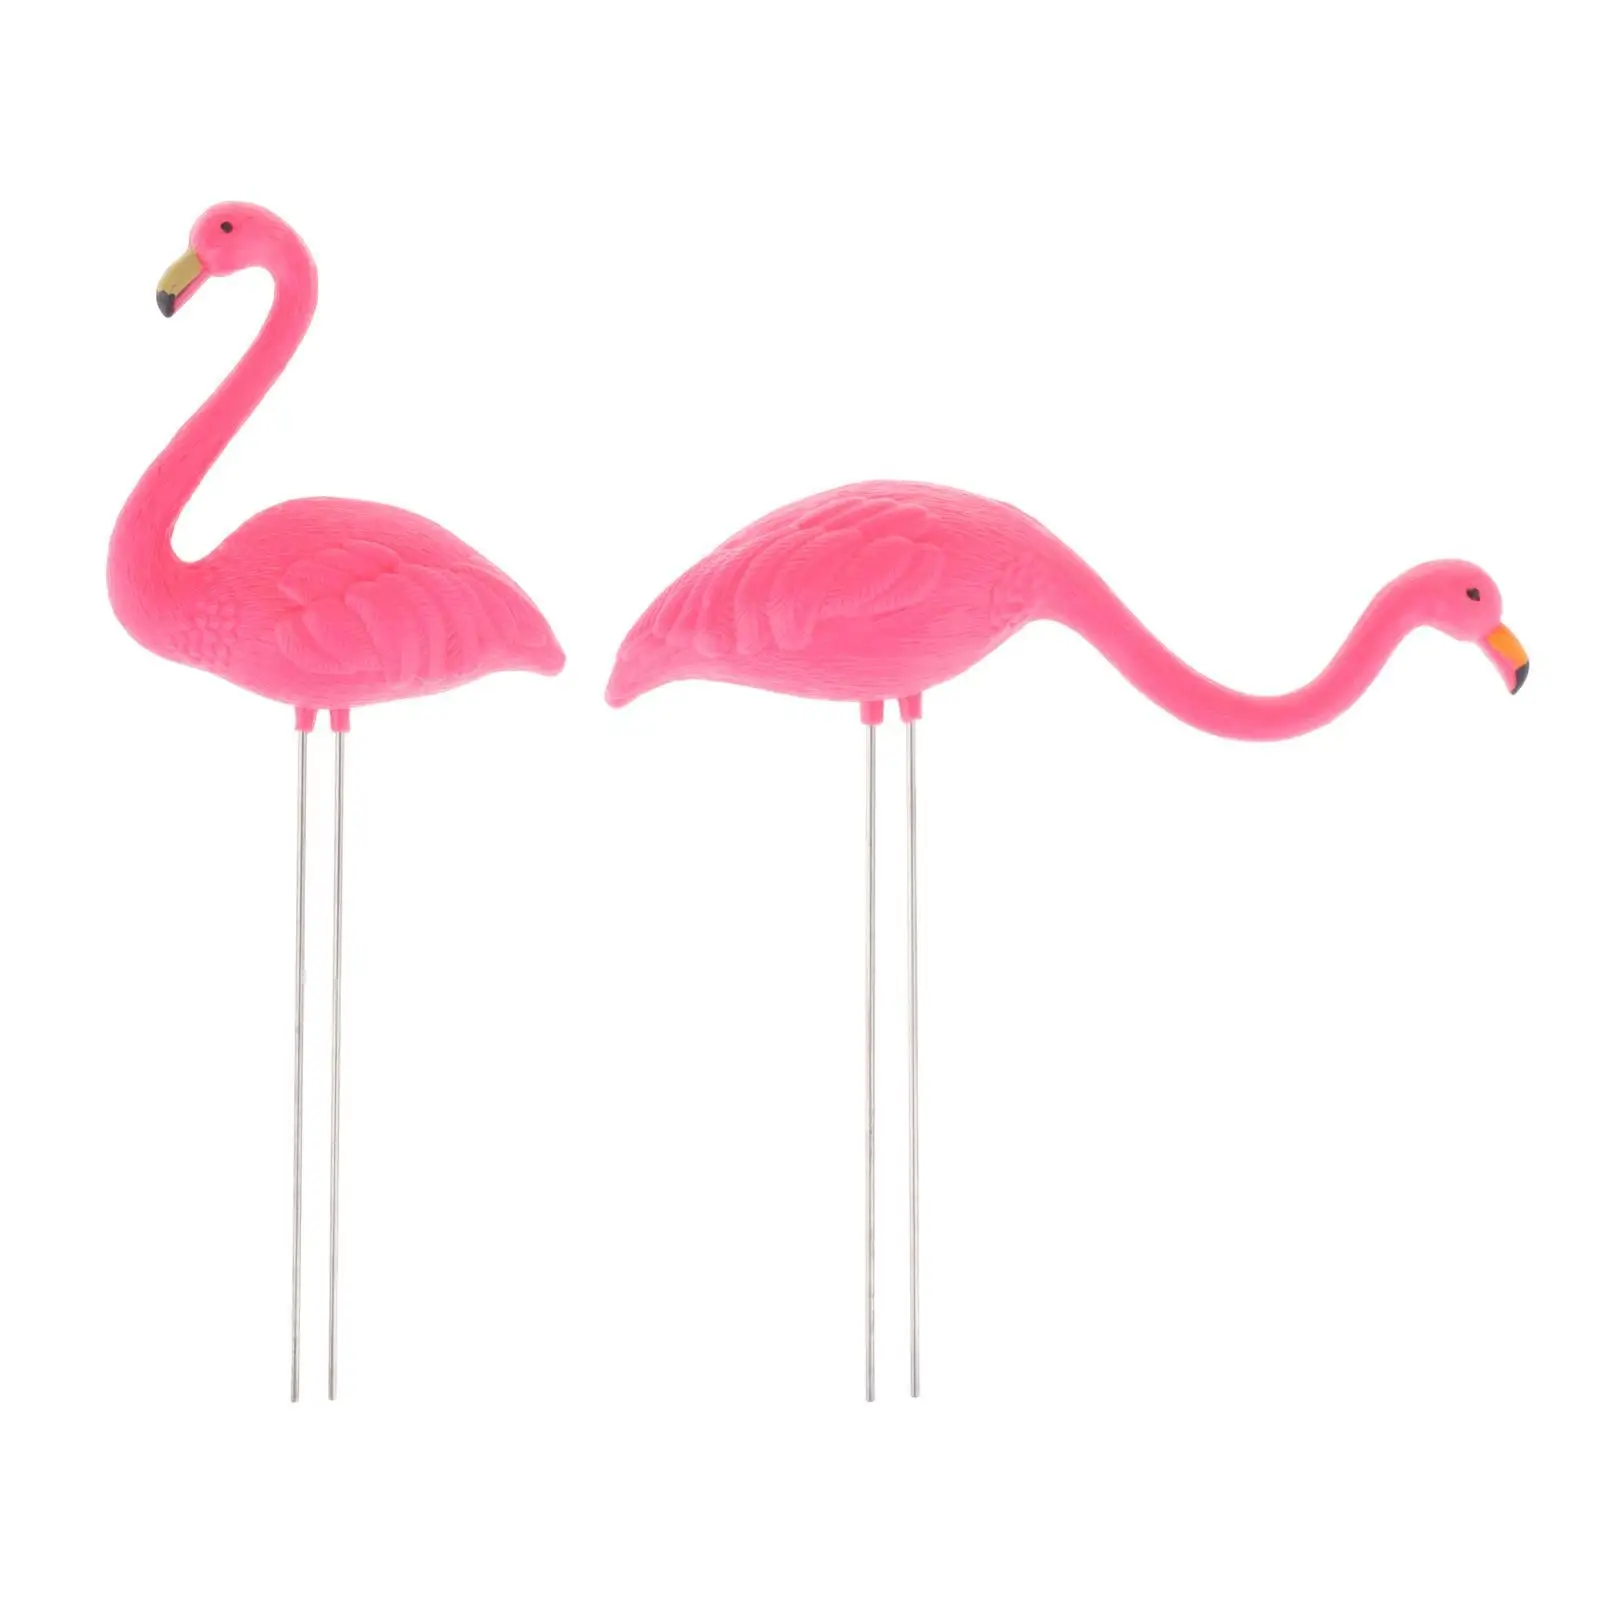 Flamingo Garden Stake Statue Figurines Yard Ornament Outdoor Lawn for Festival Indoor